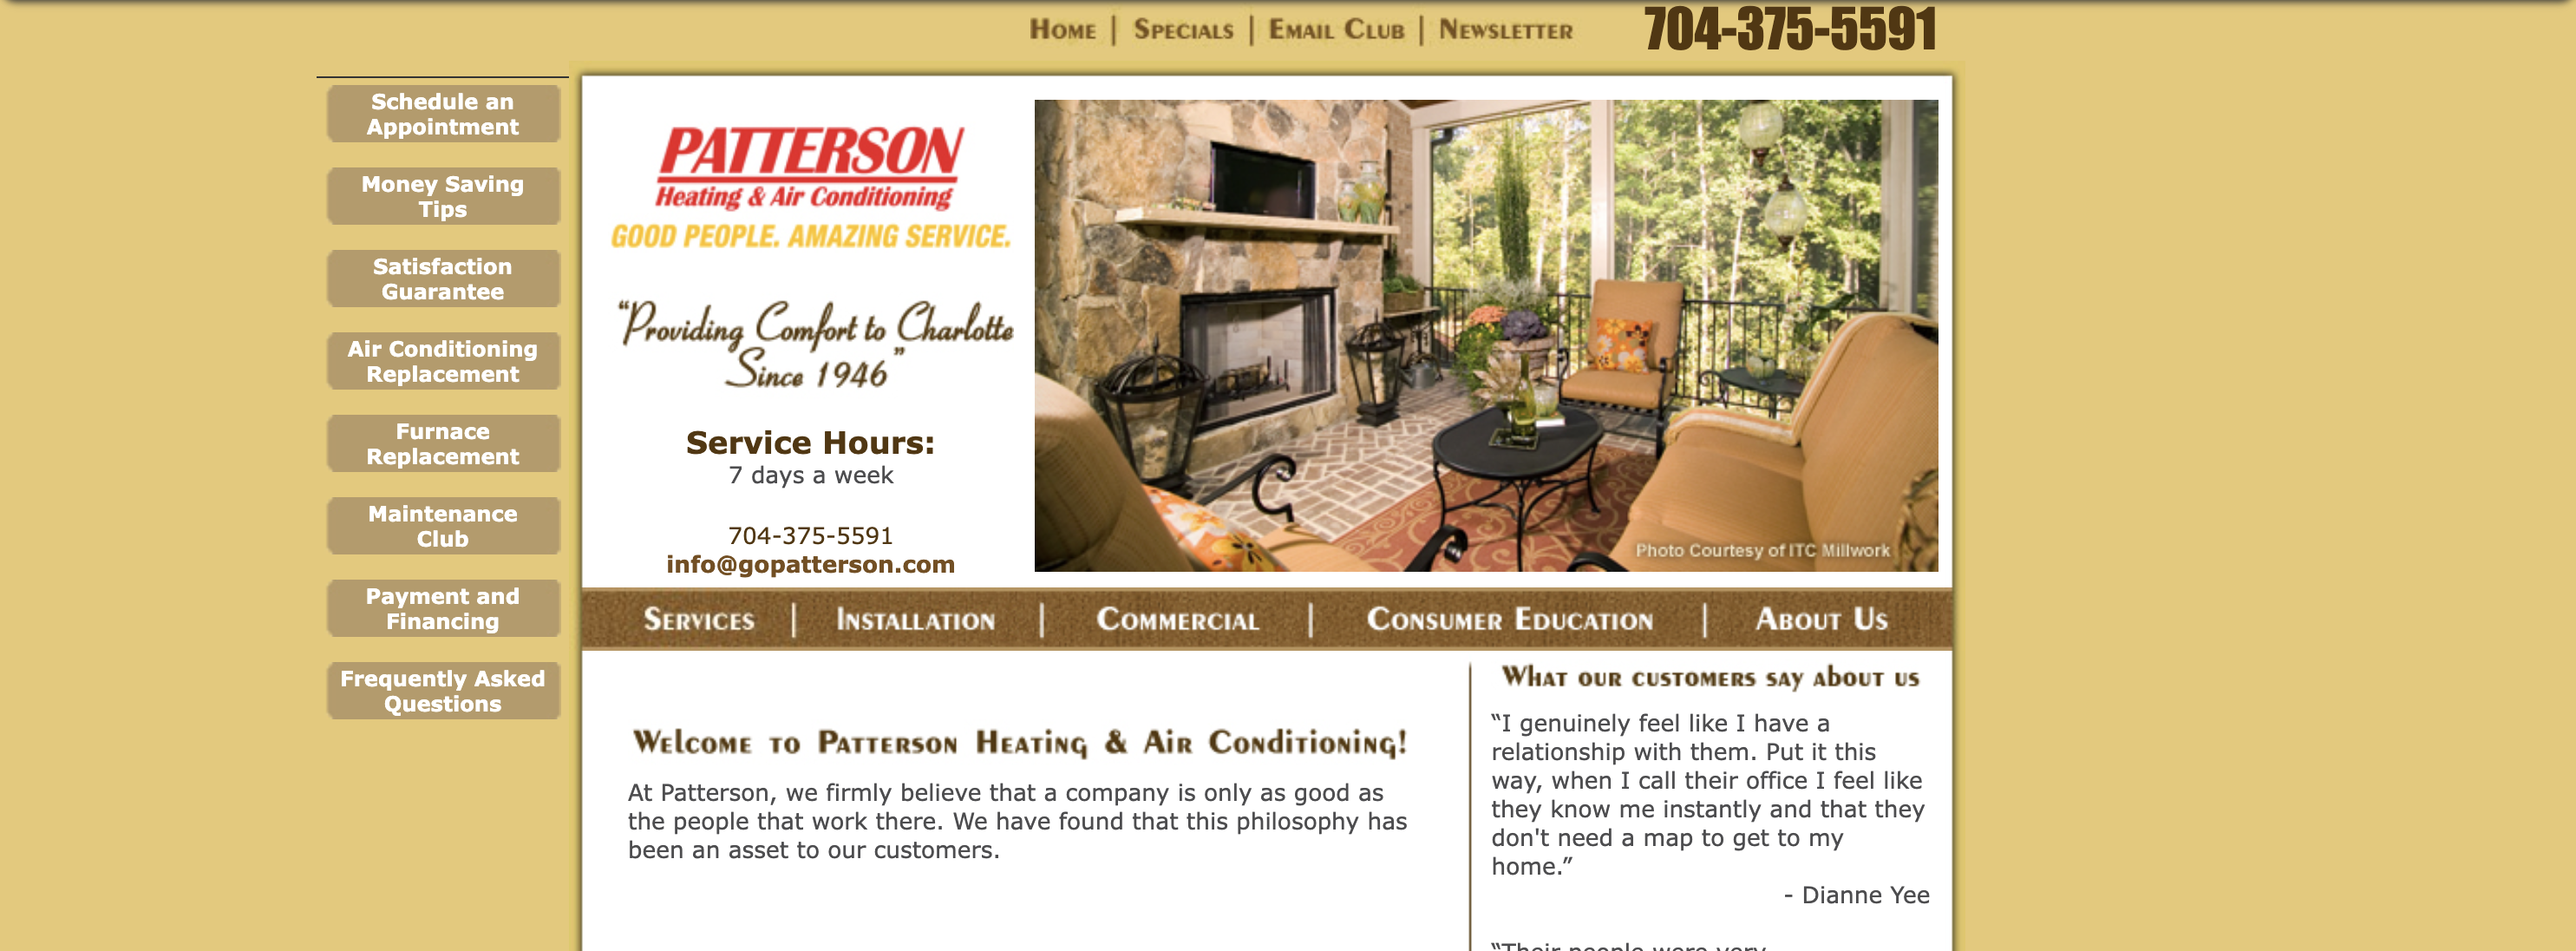 Patterson Heating and Air website screenshot